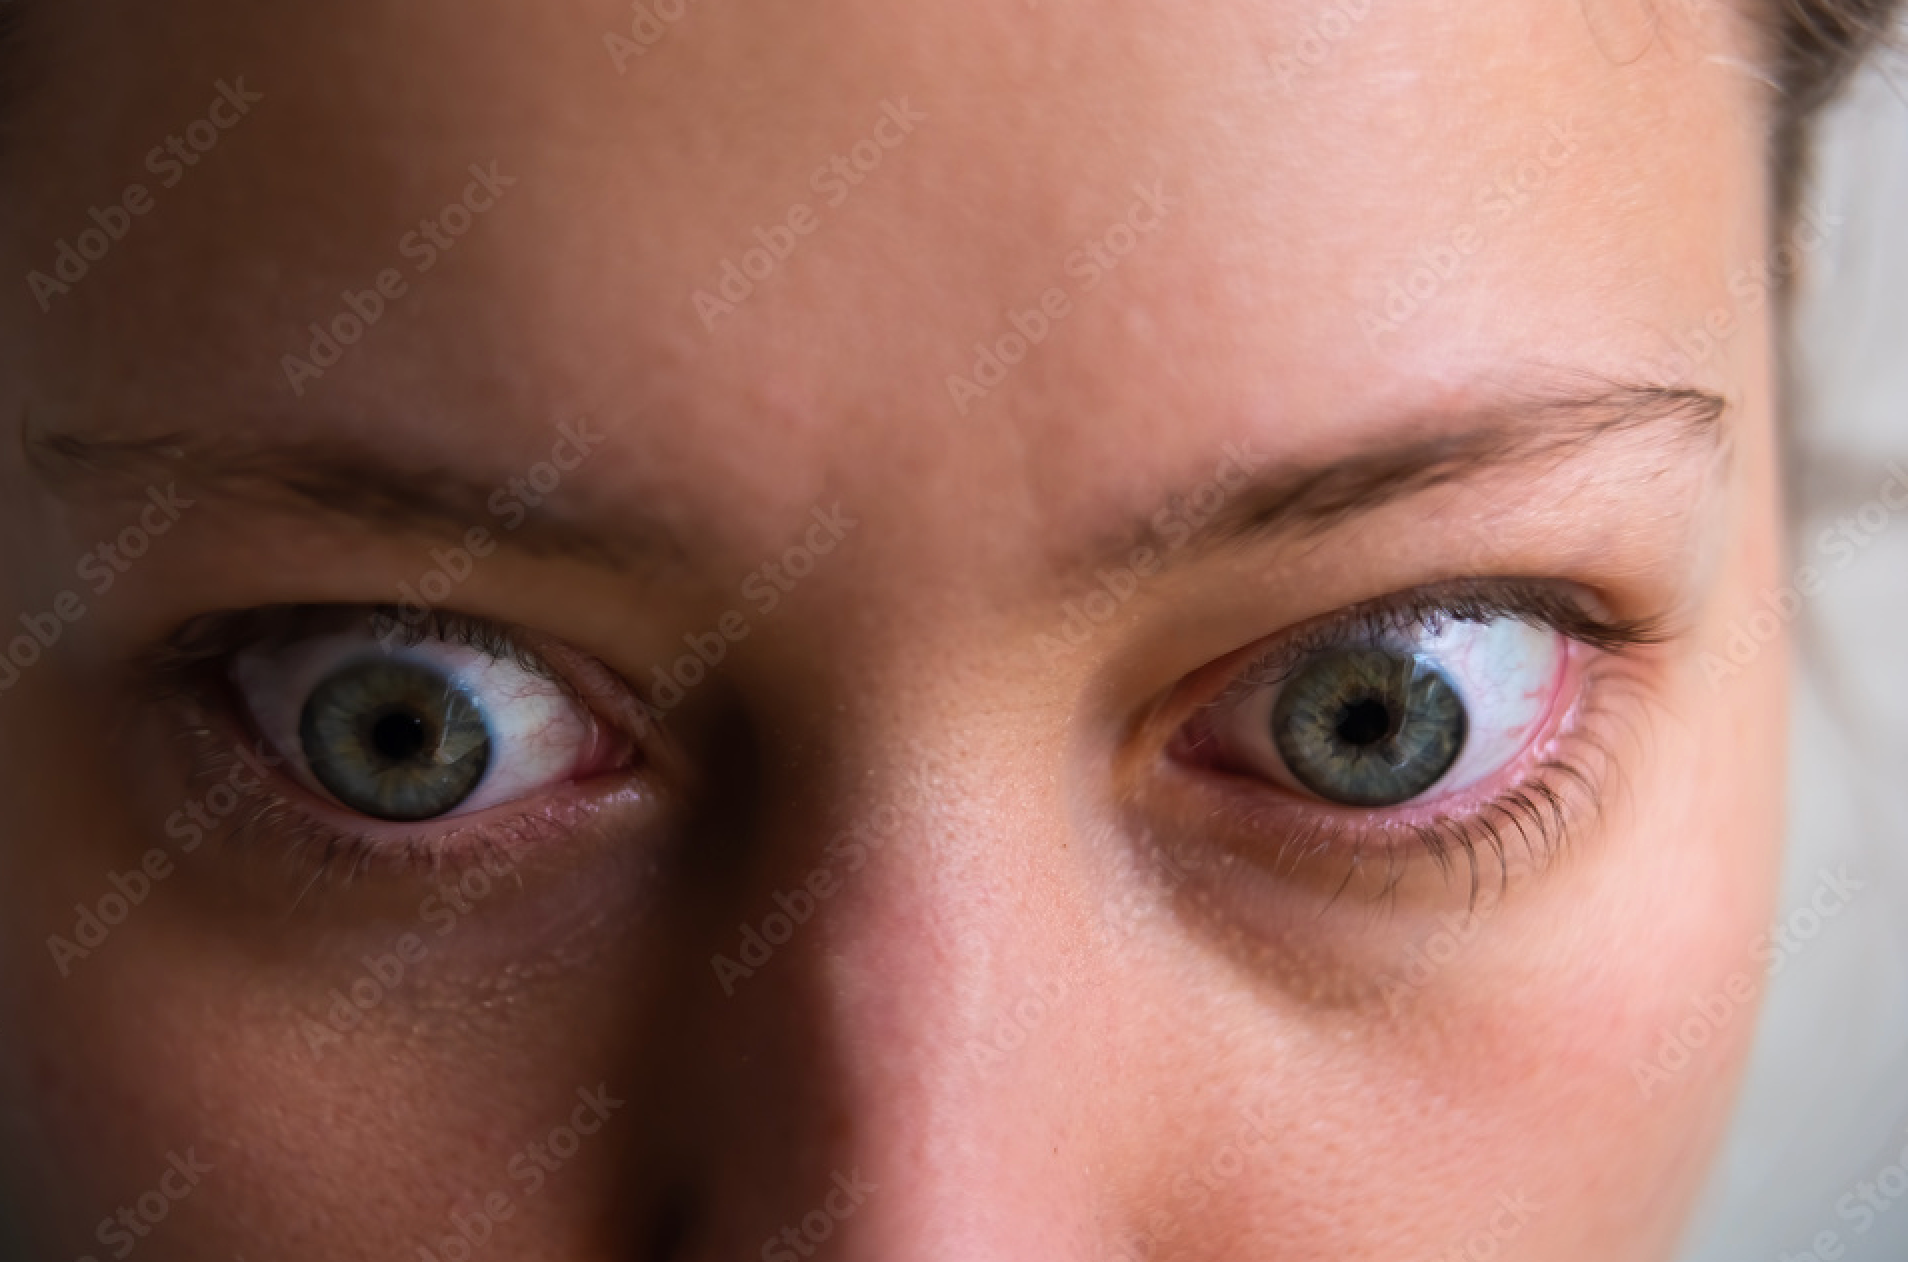 Researchers are currently looking for improved detection of thyroid eye disease in patients.